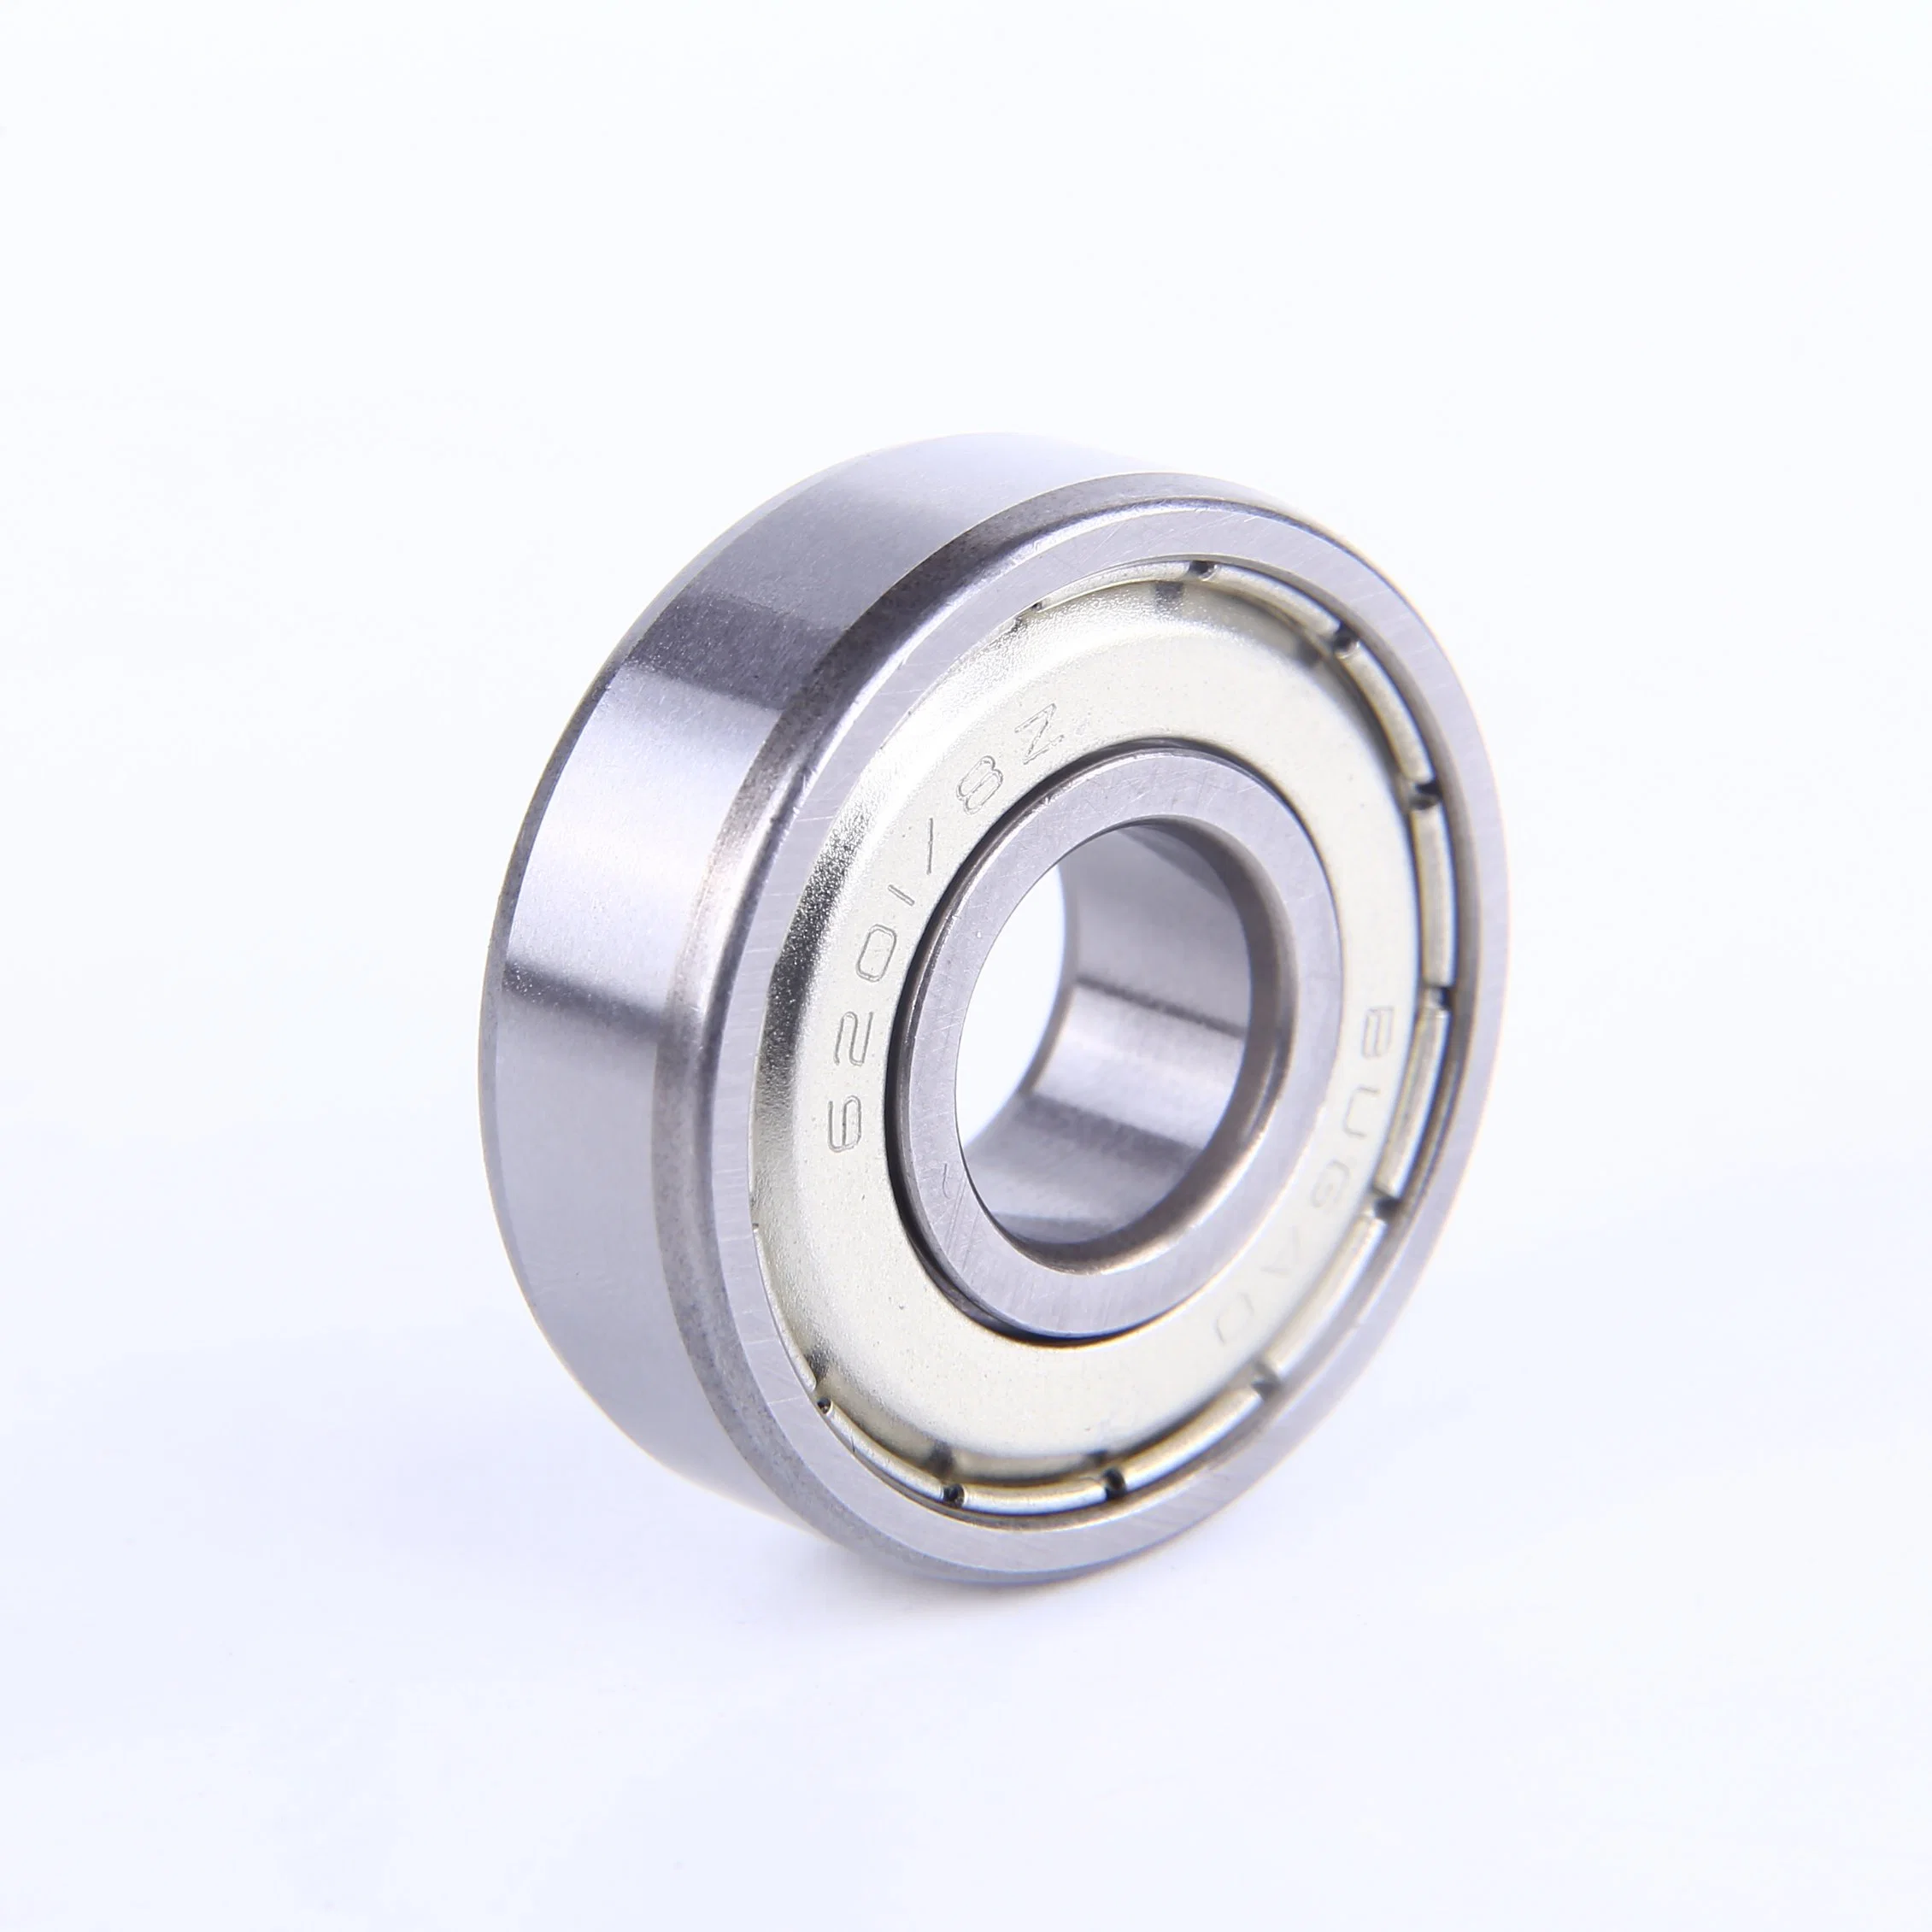 China 1688 Deep Groove Ball Bearing Manufacturer 6200 6201 6202 6203 6204 6205 6206- 6212 Z Zz Rz RS Auto Parts & Ceiling Fan & Motor 6201 6202 RS